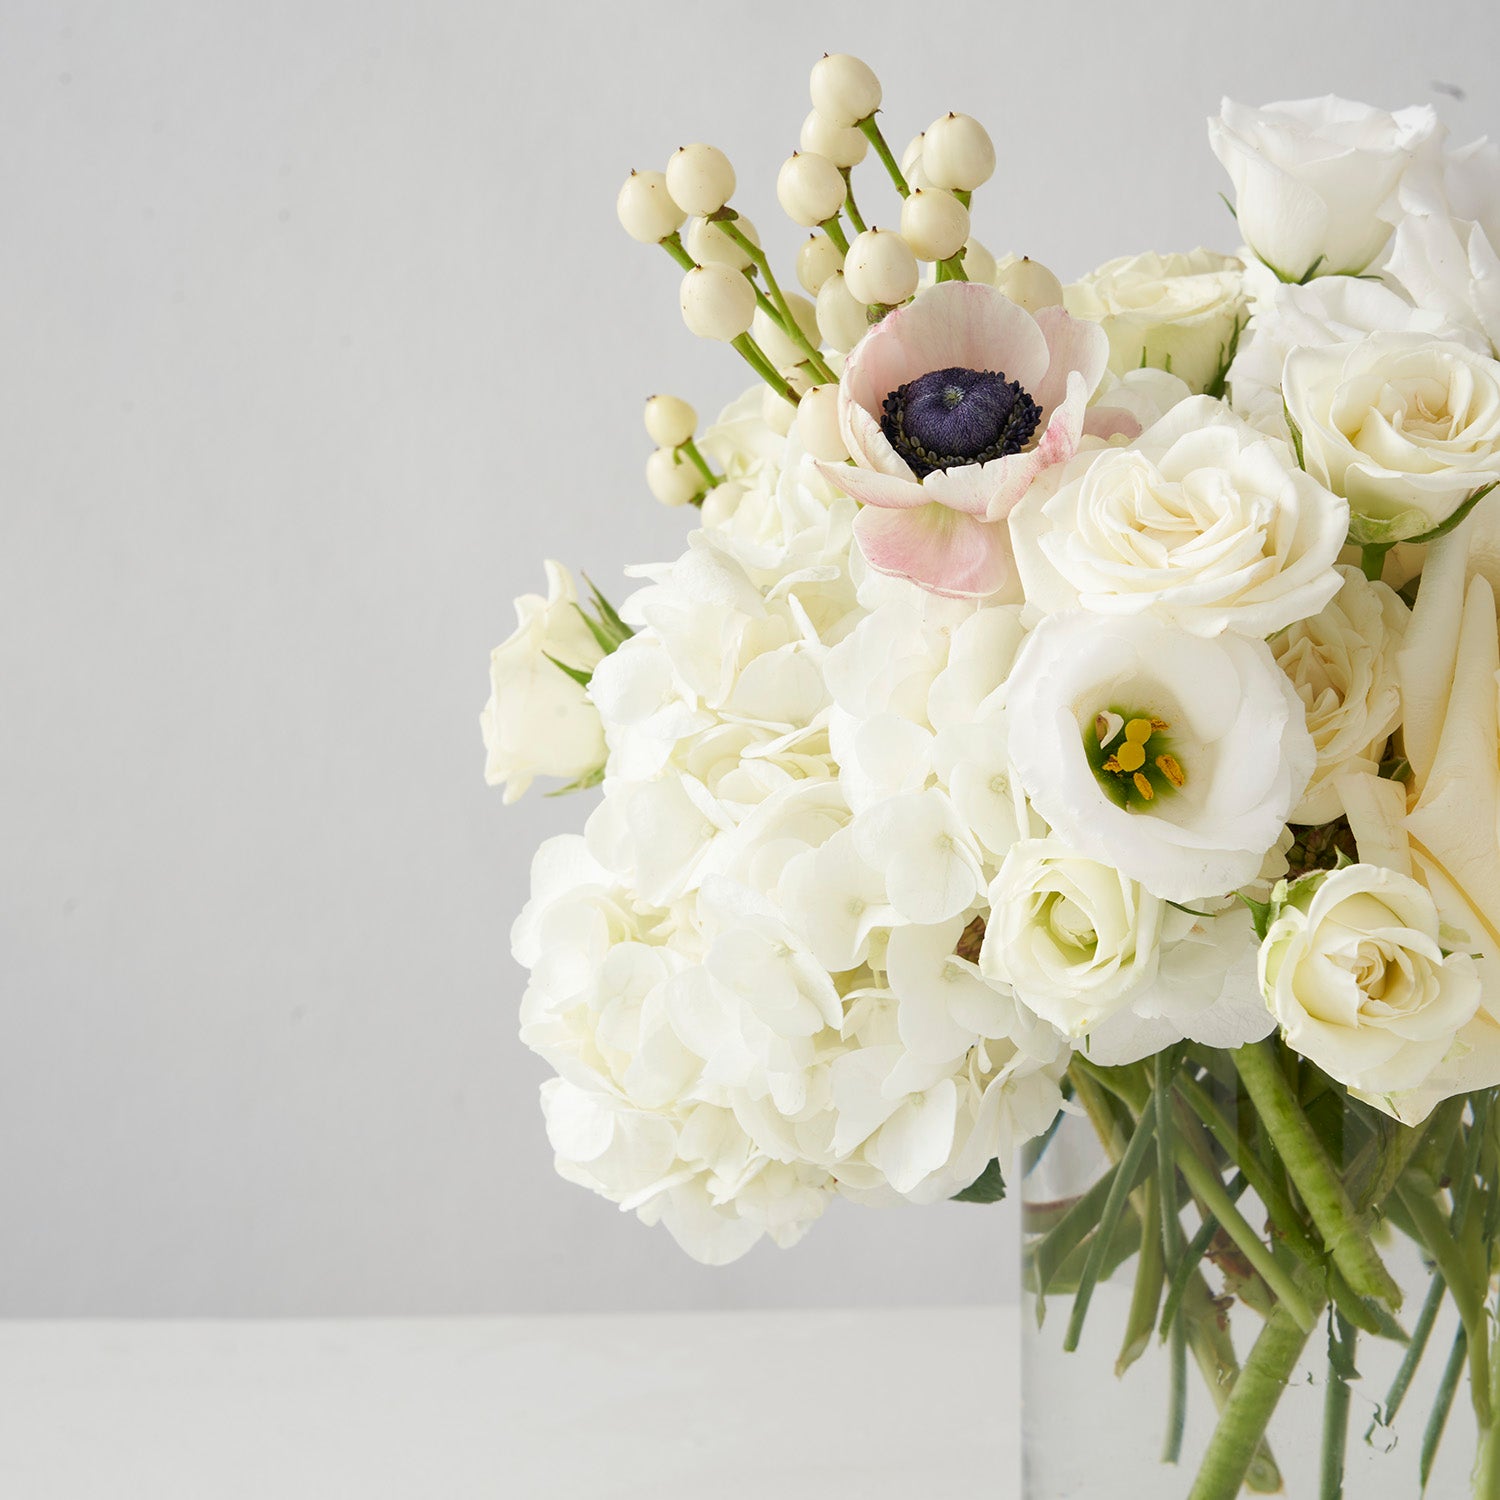 Off center image of clear glass vase filled with white flowers including roses, anemonies, and lisianthus and stems in water on white background.